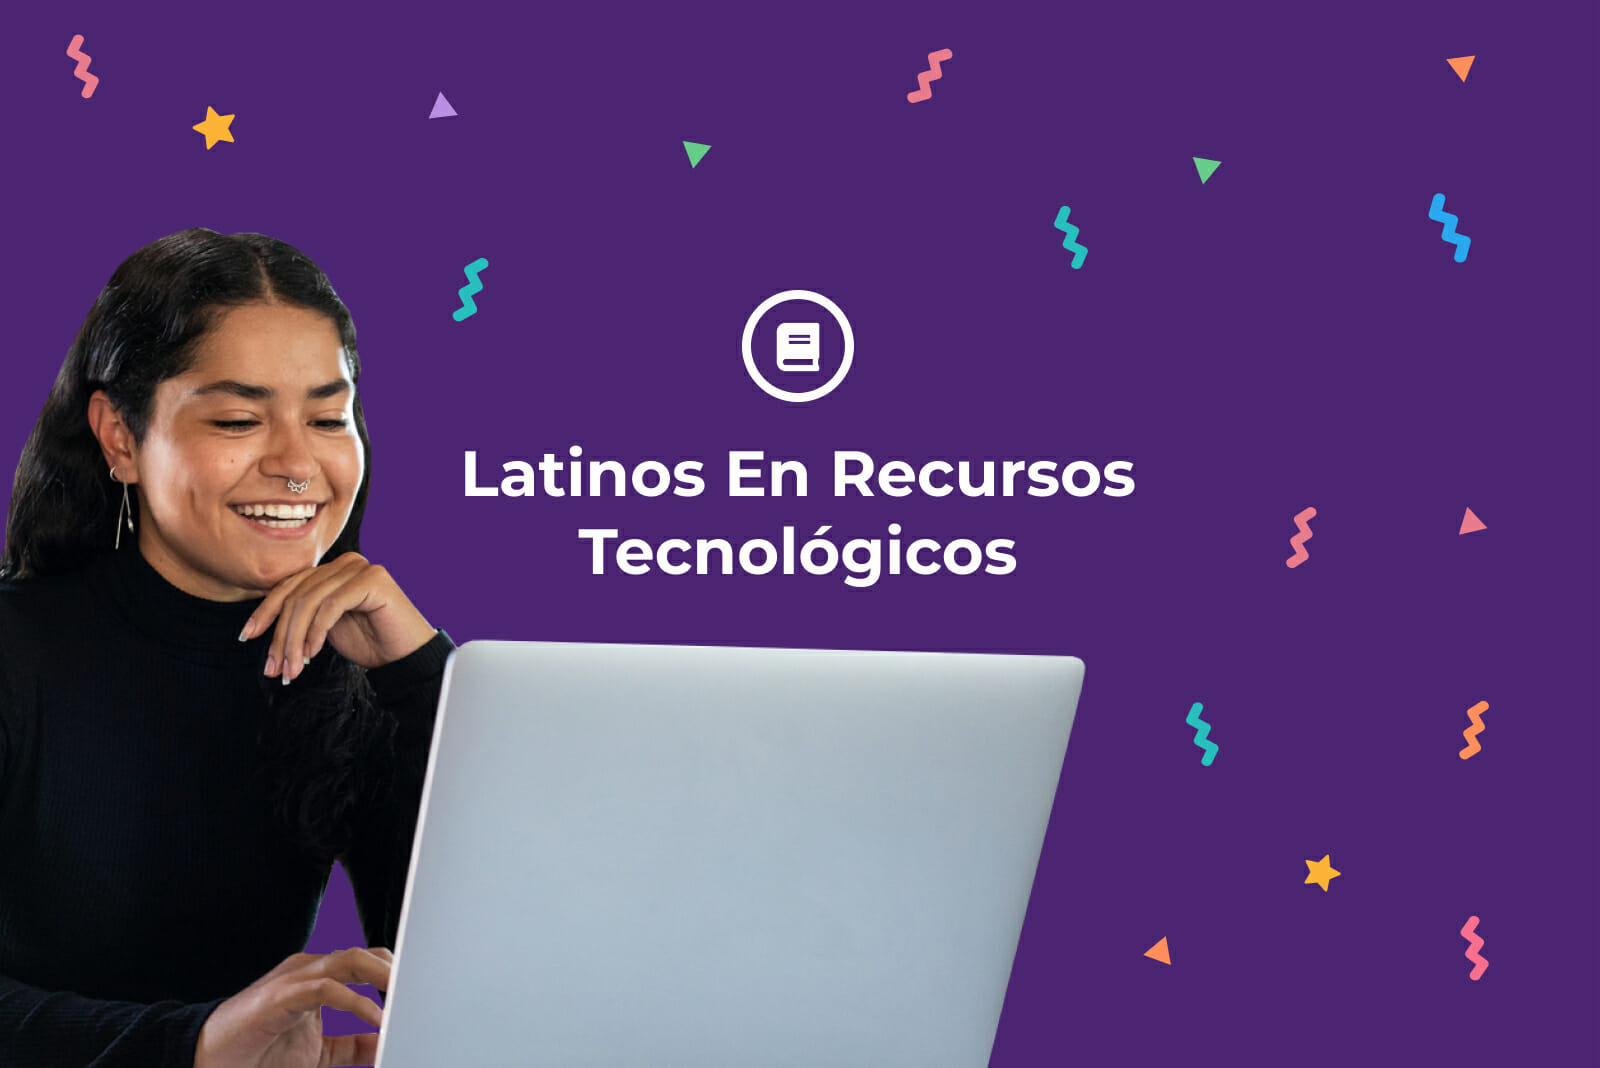 Latinx woman using a laptop in front of a purple background with confetti